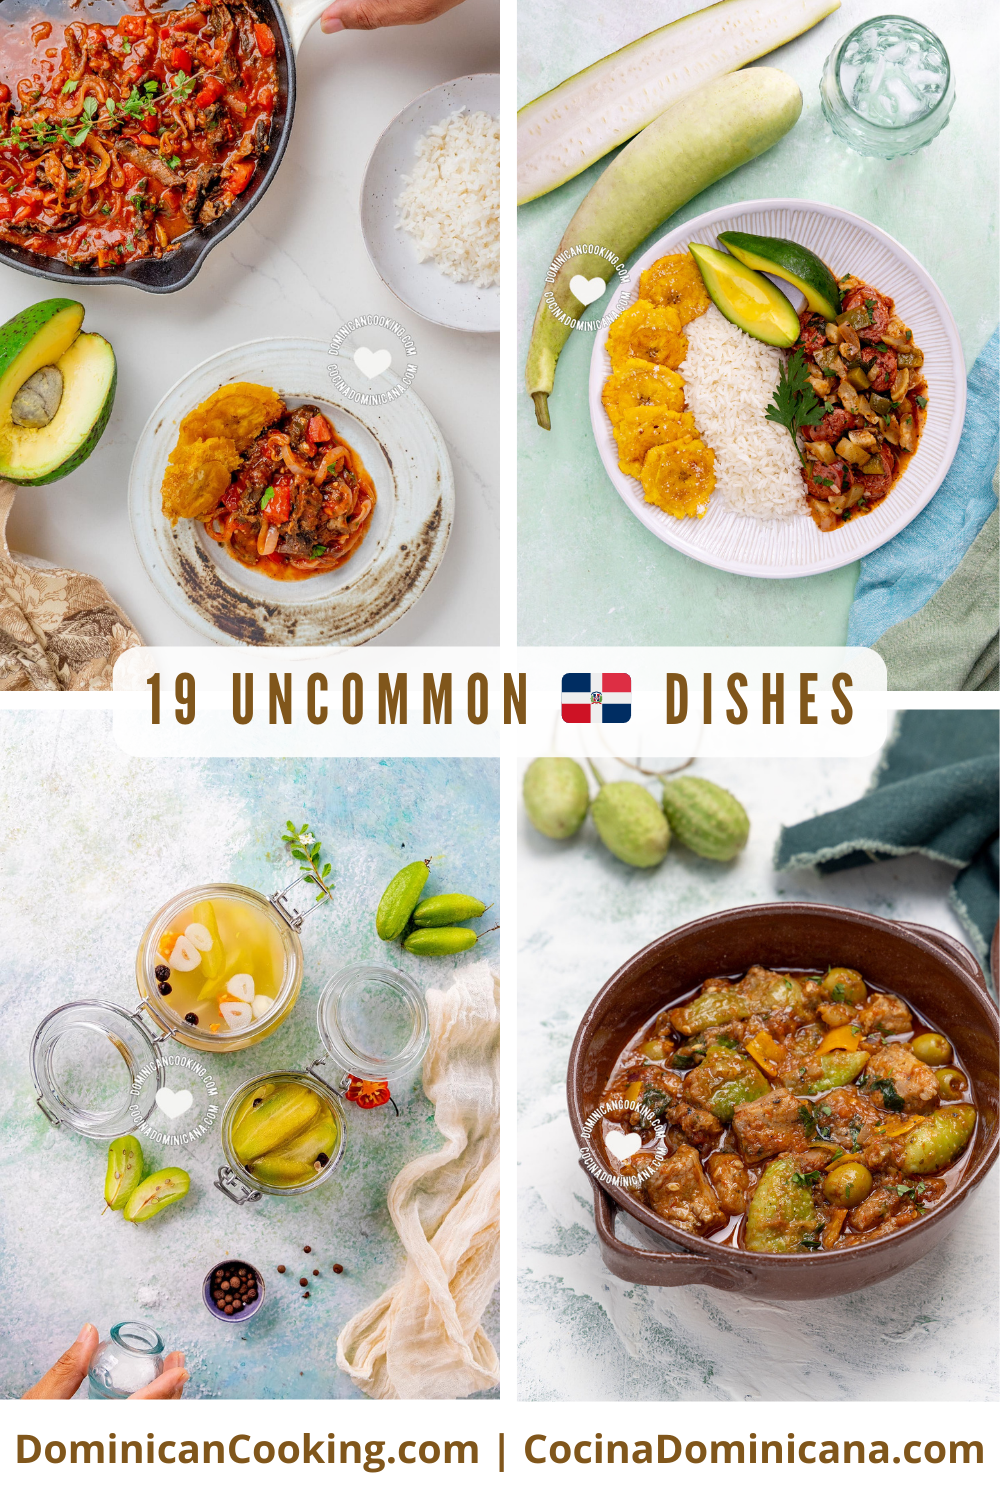 Uncommon Dominican dishes.